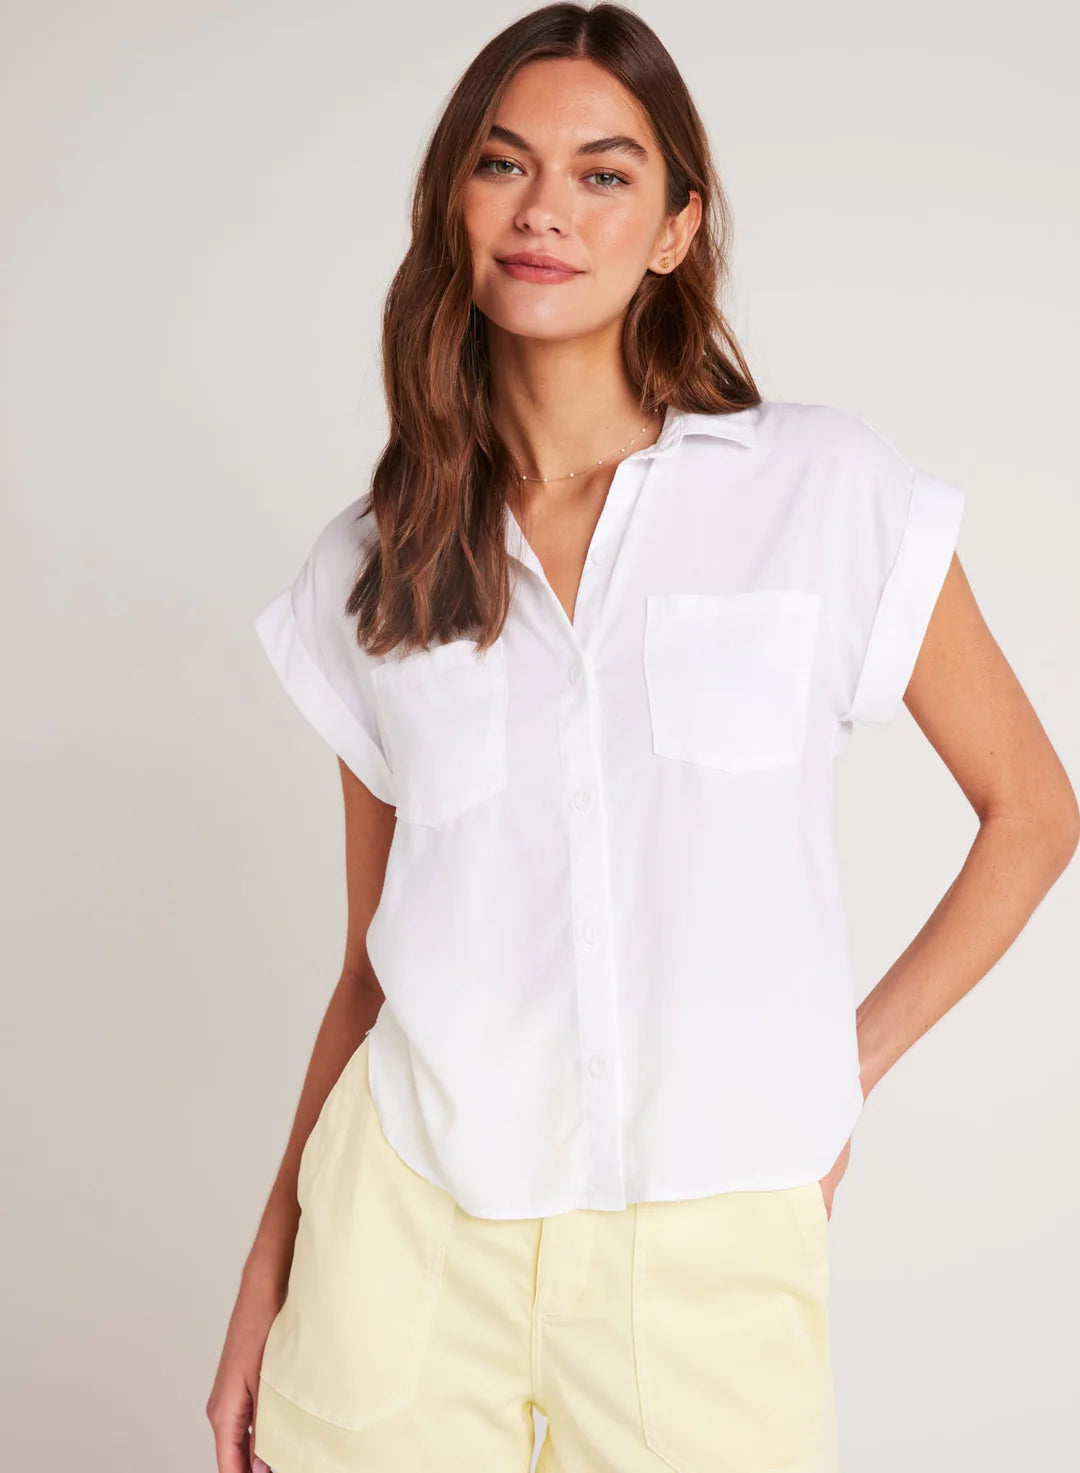 Short sleeved white shirt with grown sleeve and turn up cuffs